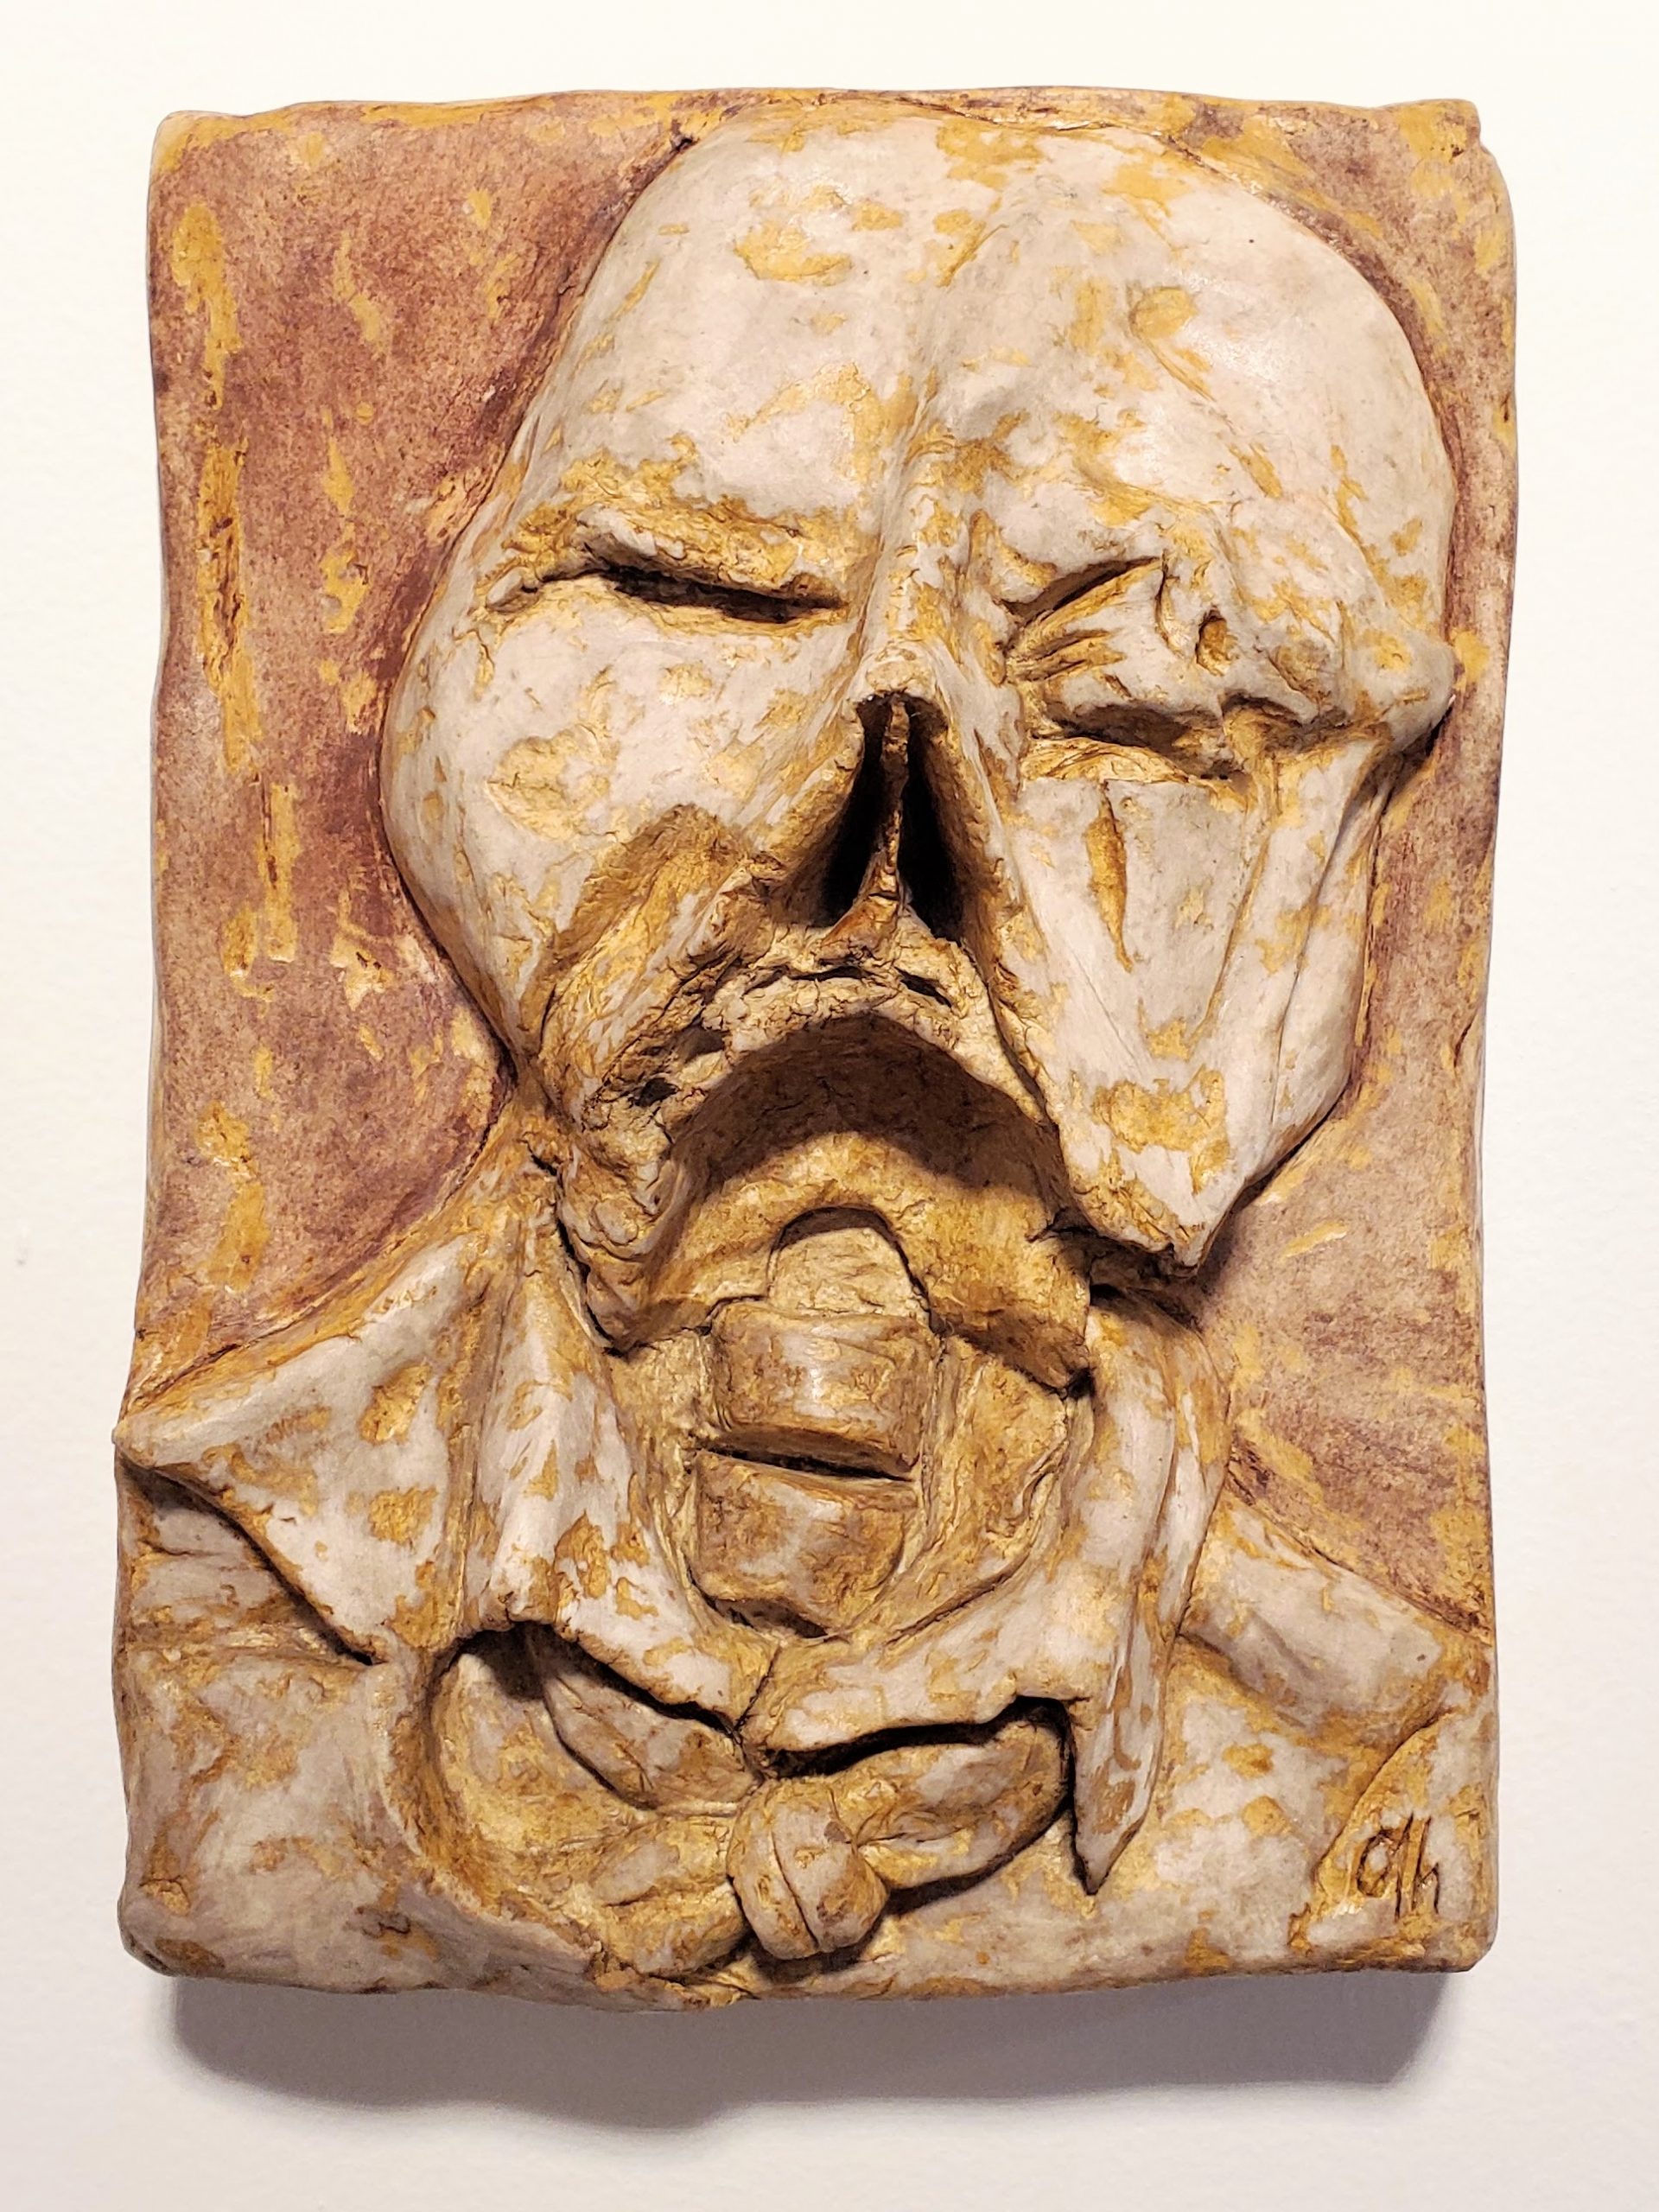 relief sculpture of decomposing businessman, partially mummified, exposed skeleton wearing a suit